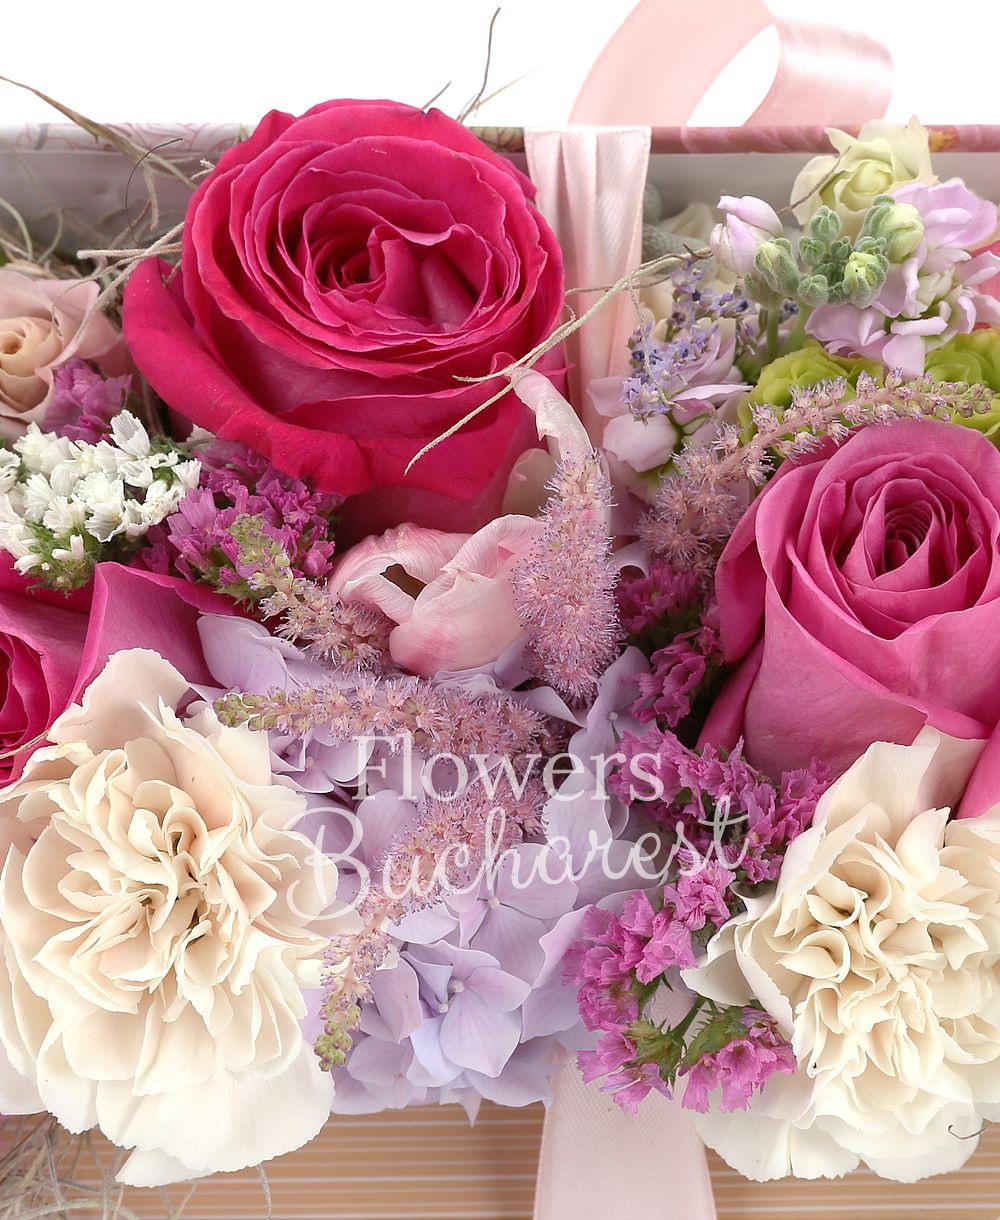 3 cyclam roses, 5 carnations, 3 cyclam carnations, 2 pink alstroemeria, 3 pink lisianthus, 3 brunia, 2 pink mathiolla, pink astilbe, rice flower, pink limonium